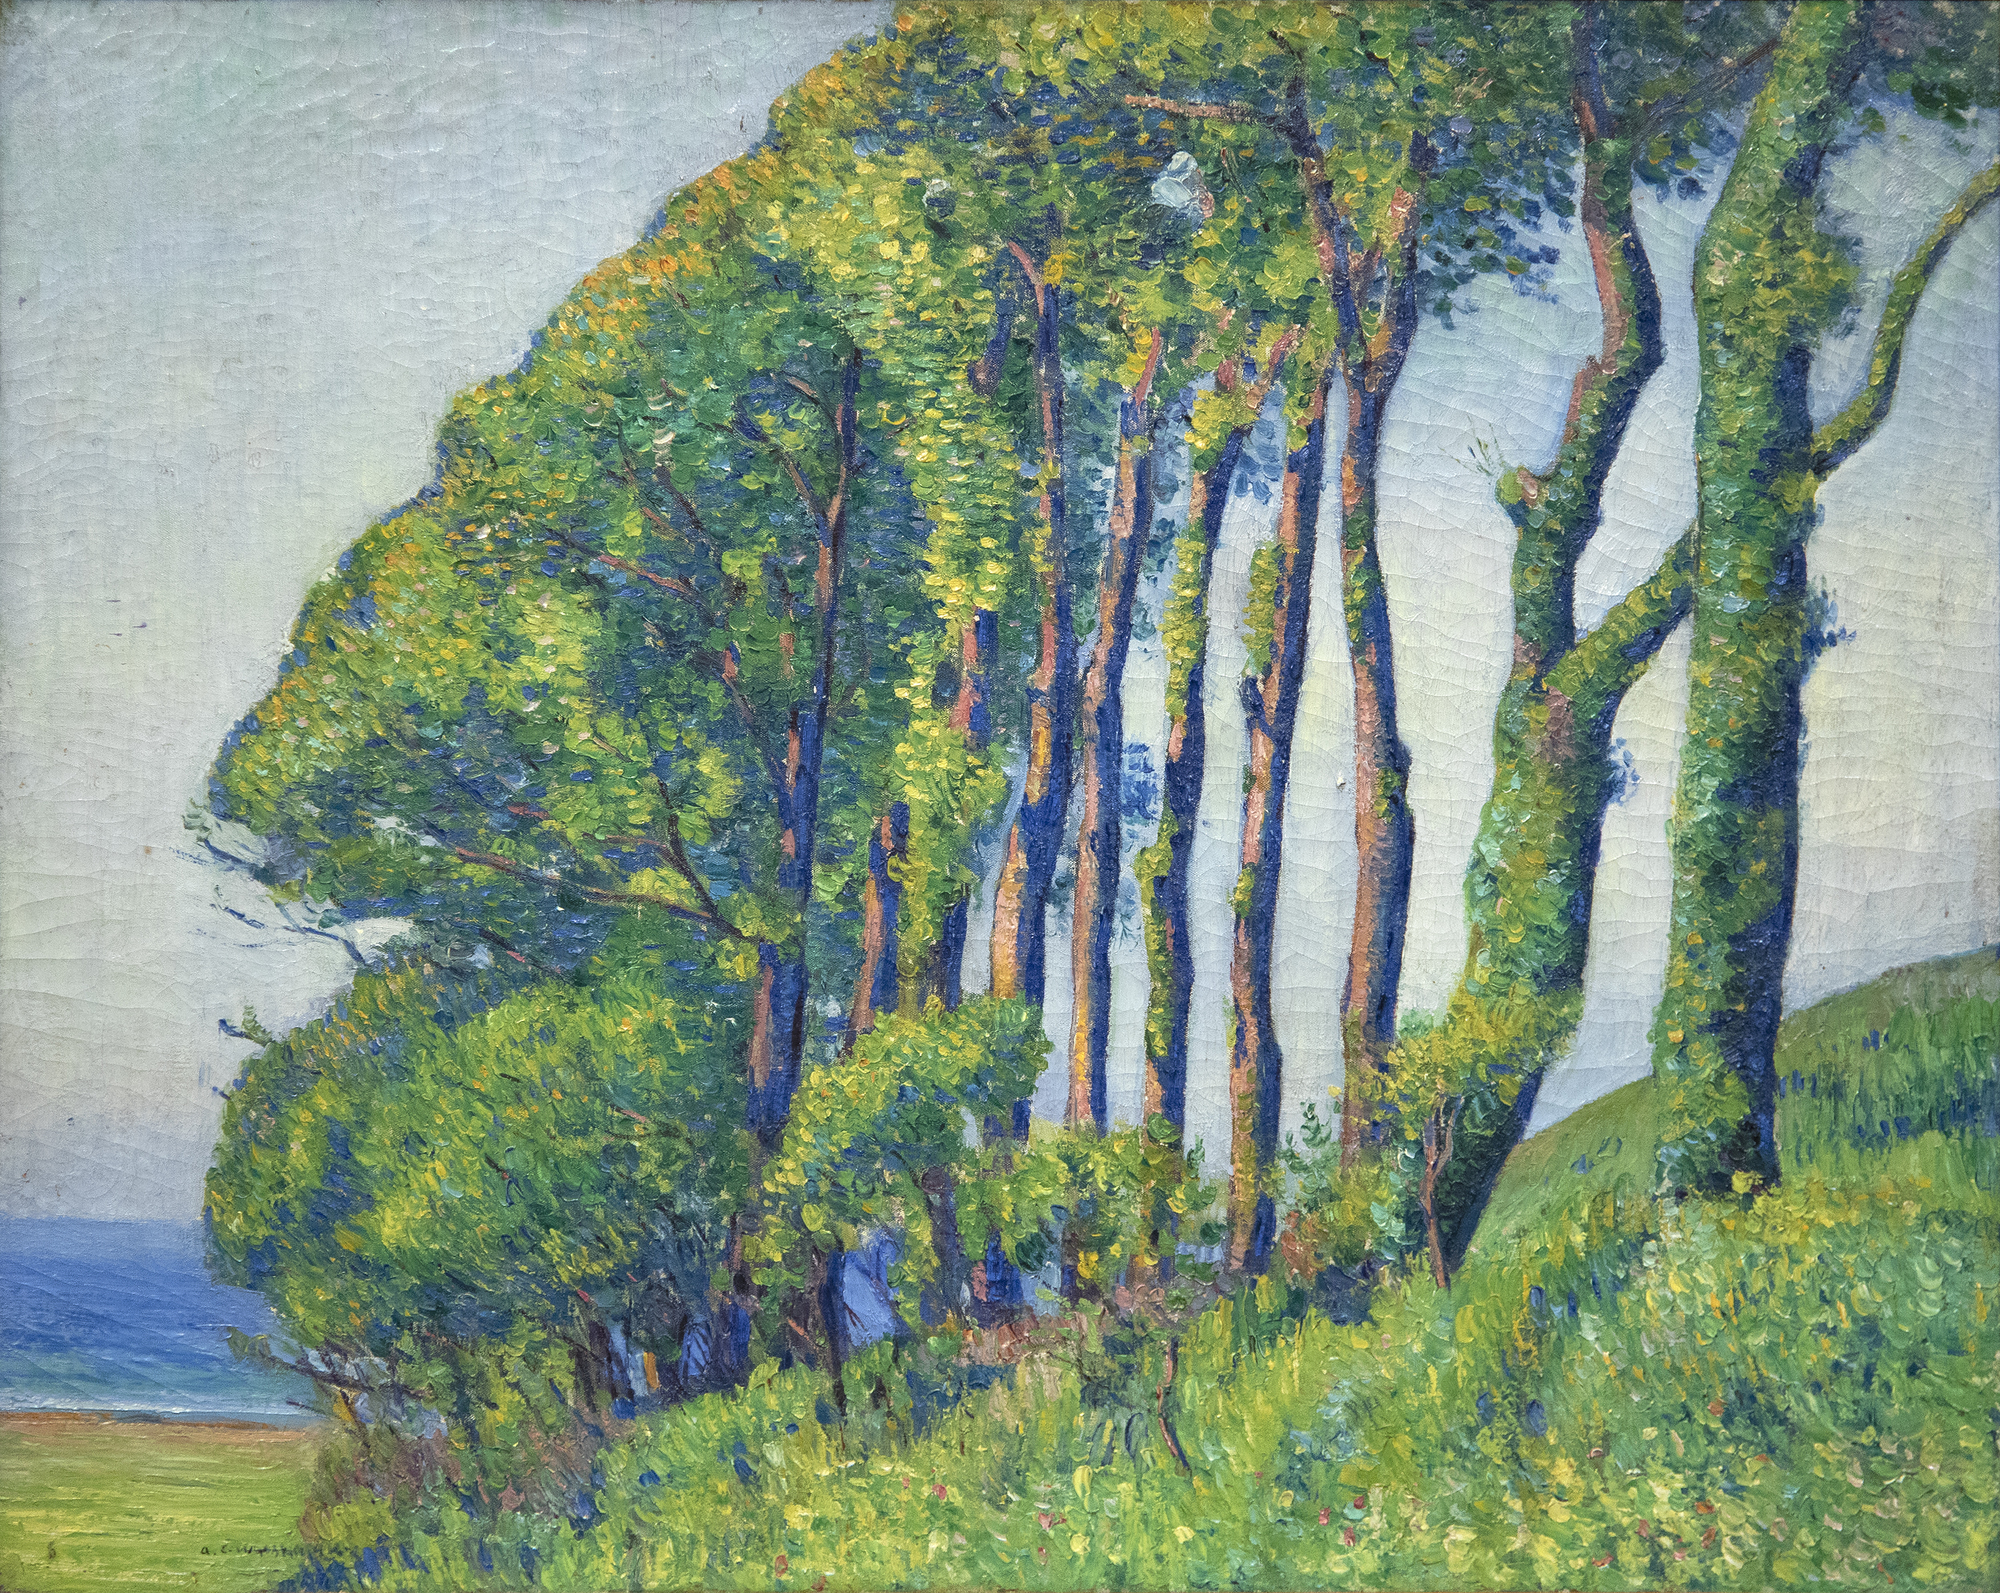 ABEL GEORGE WARSHAWSKY - Trees in Brittany - oil on canvas - 25 1/2 x 32 in.